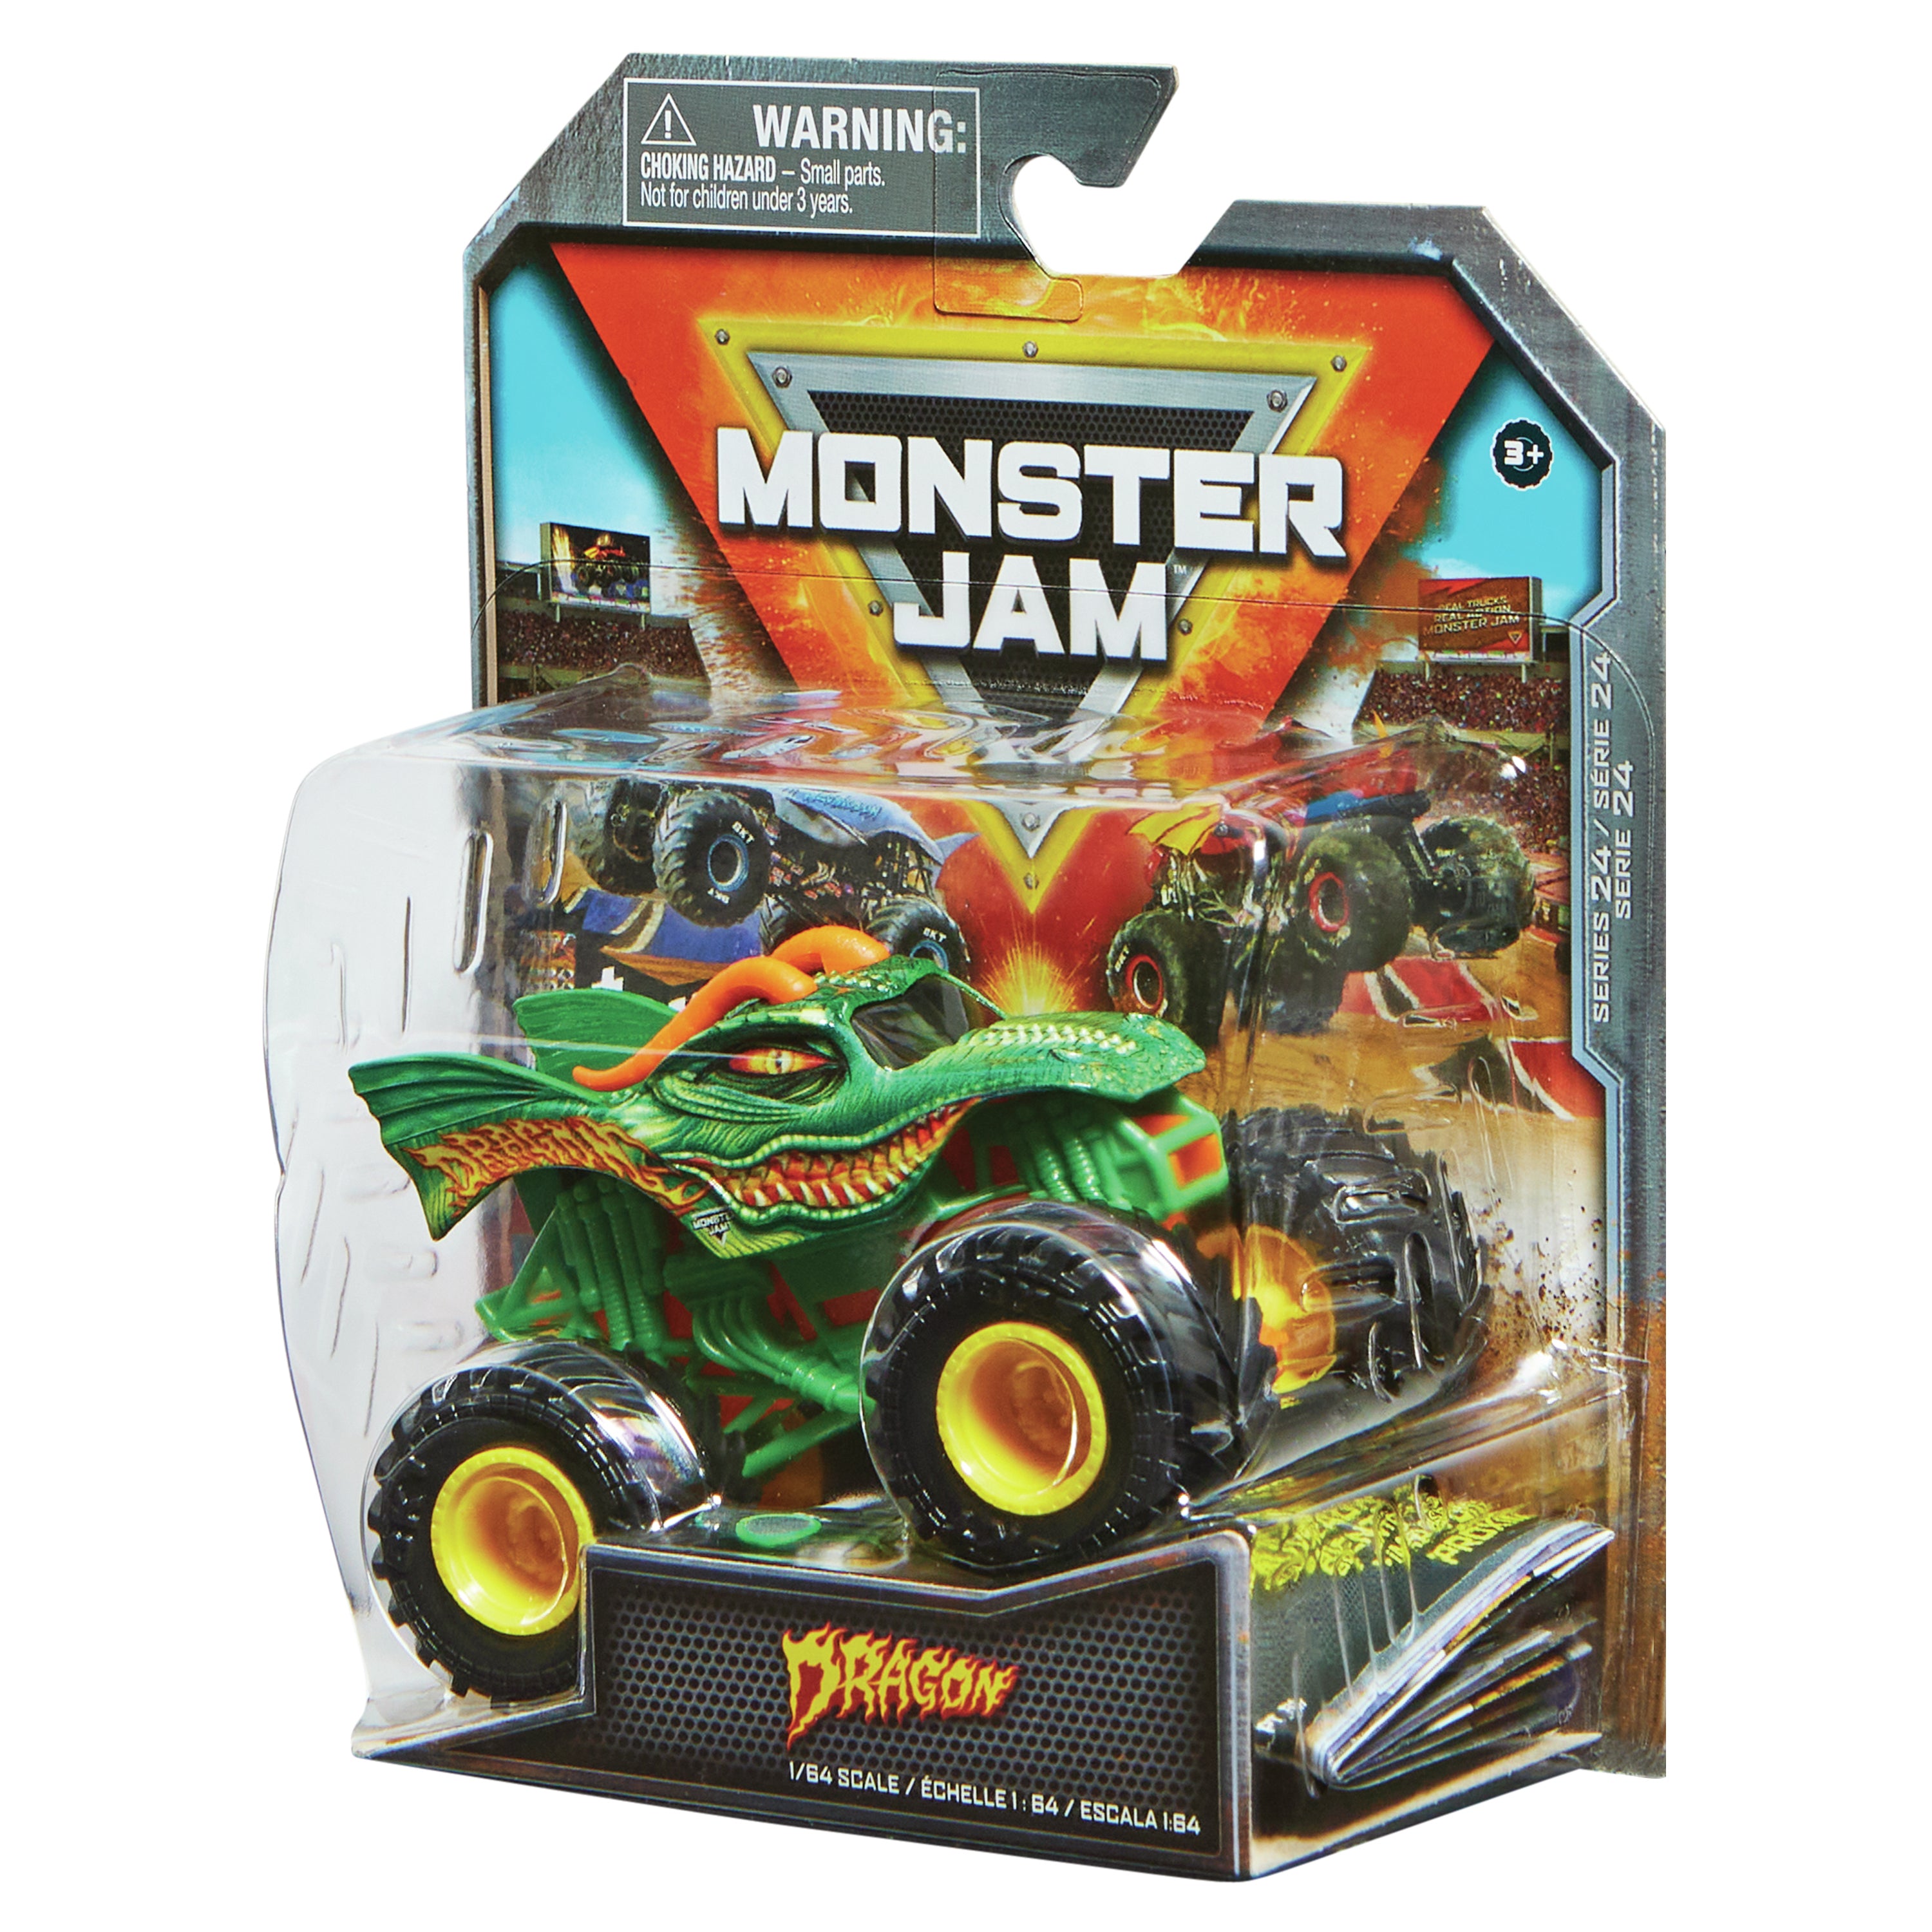 SPIN MASTER - Monster Jam, Official Earth Shaker Monster Truck, Die-Cast Vehicle, Show Time Series, 1:64 Scale